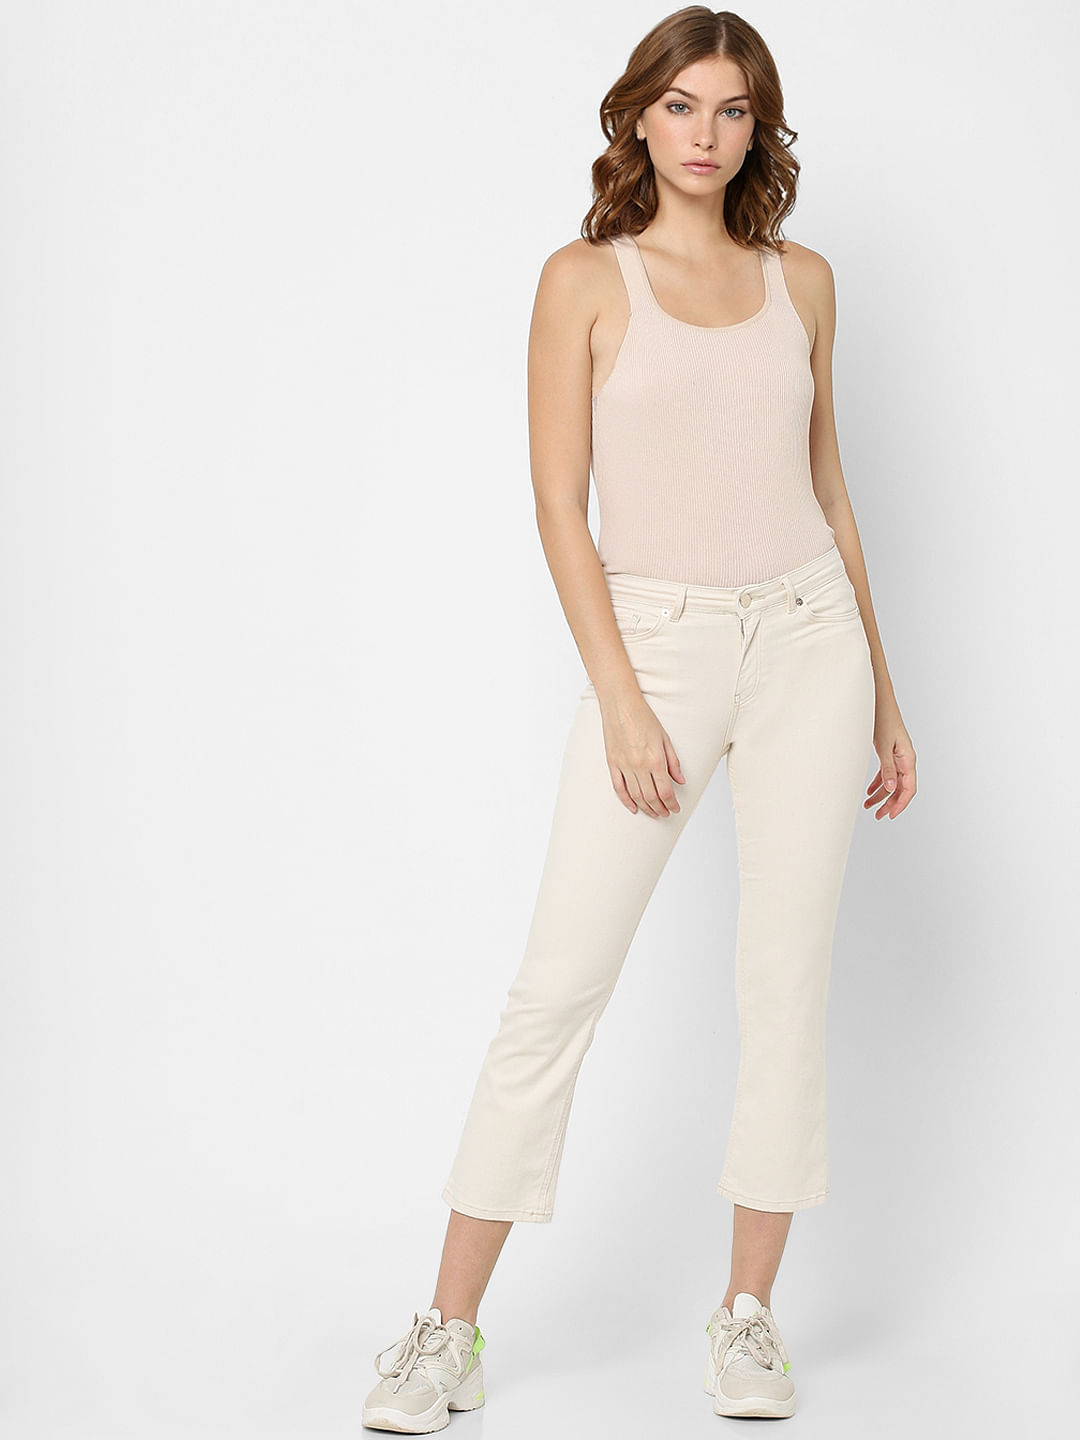 Buy White Jeans Online in India at Best Price  Westside